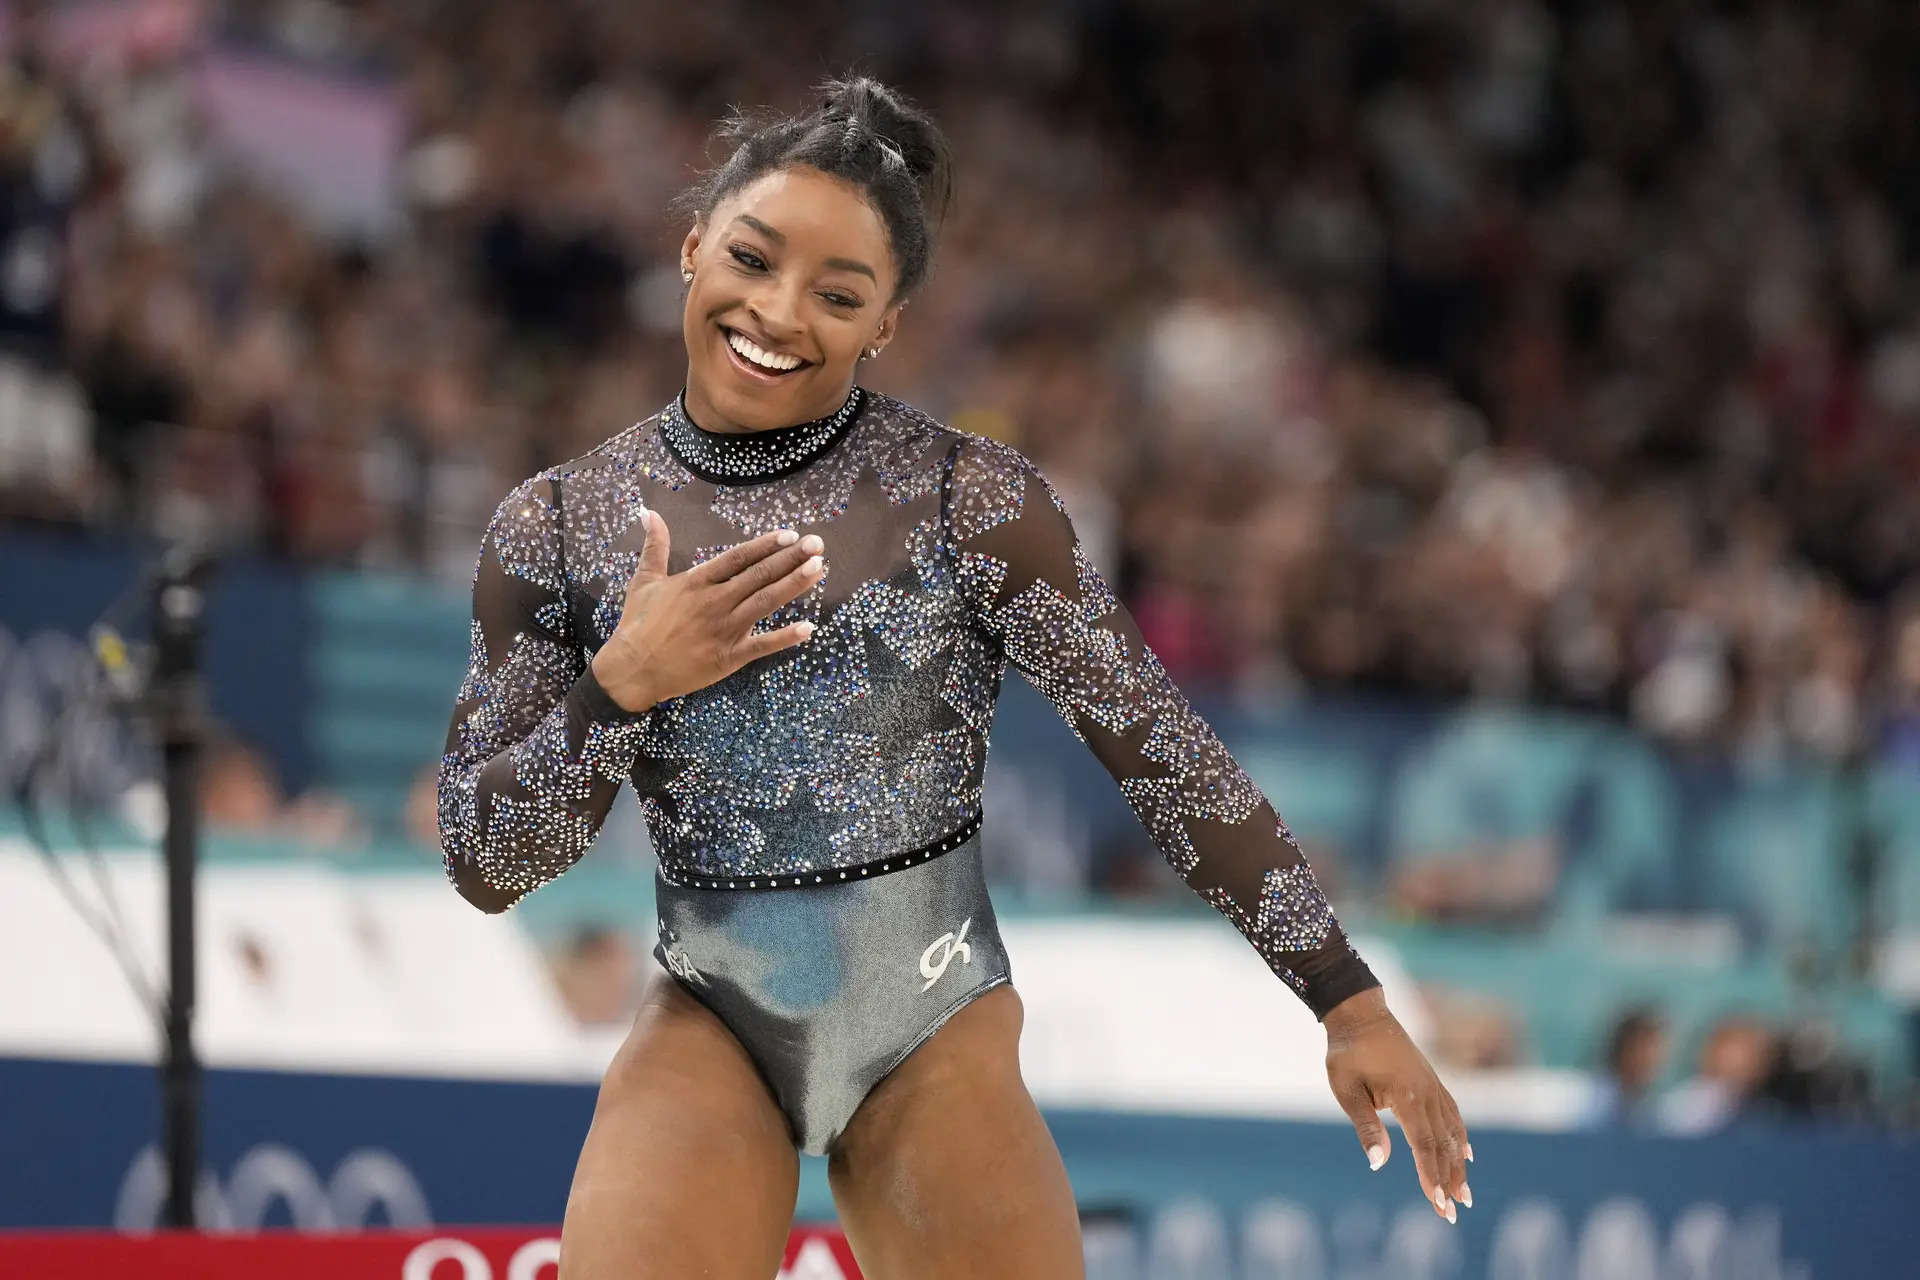 Is Simone Biles the most decorated U.S. gymnast in Olympic history? 